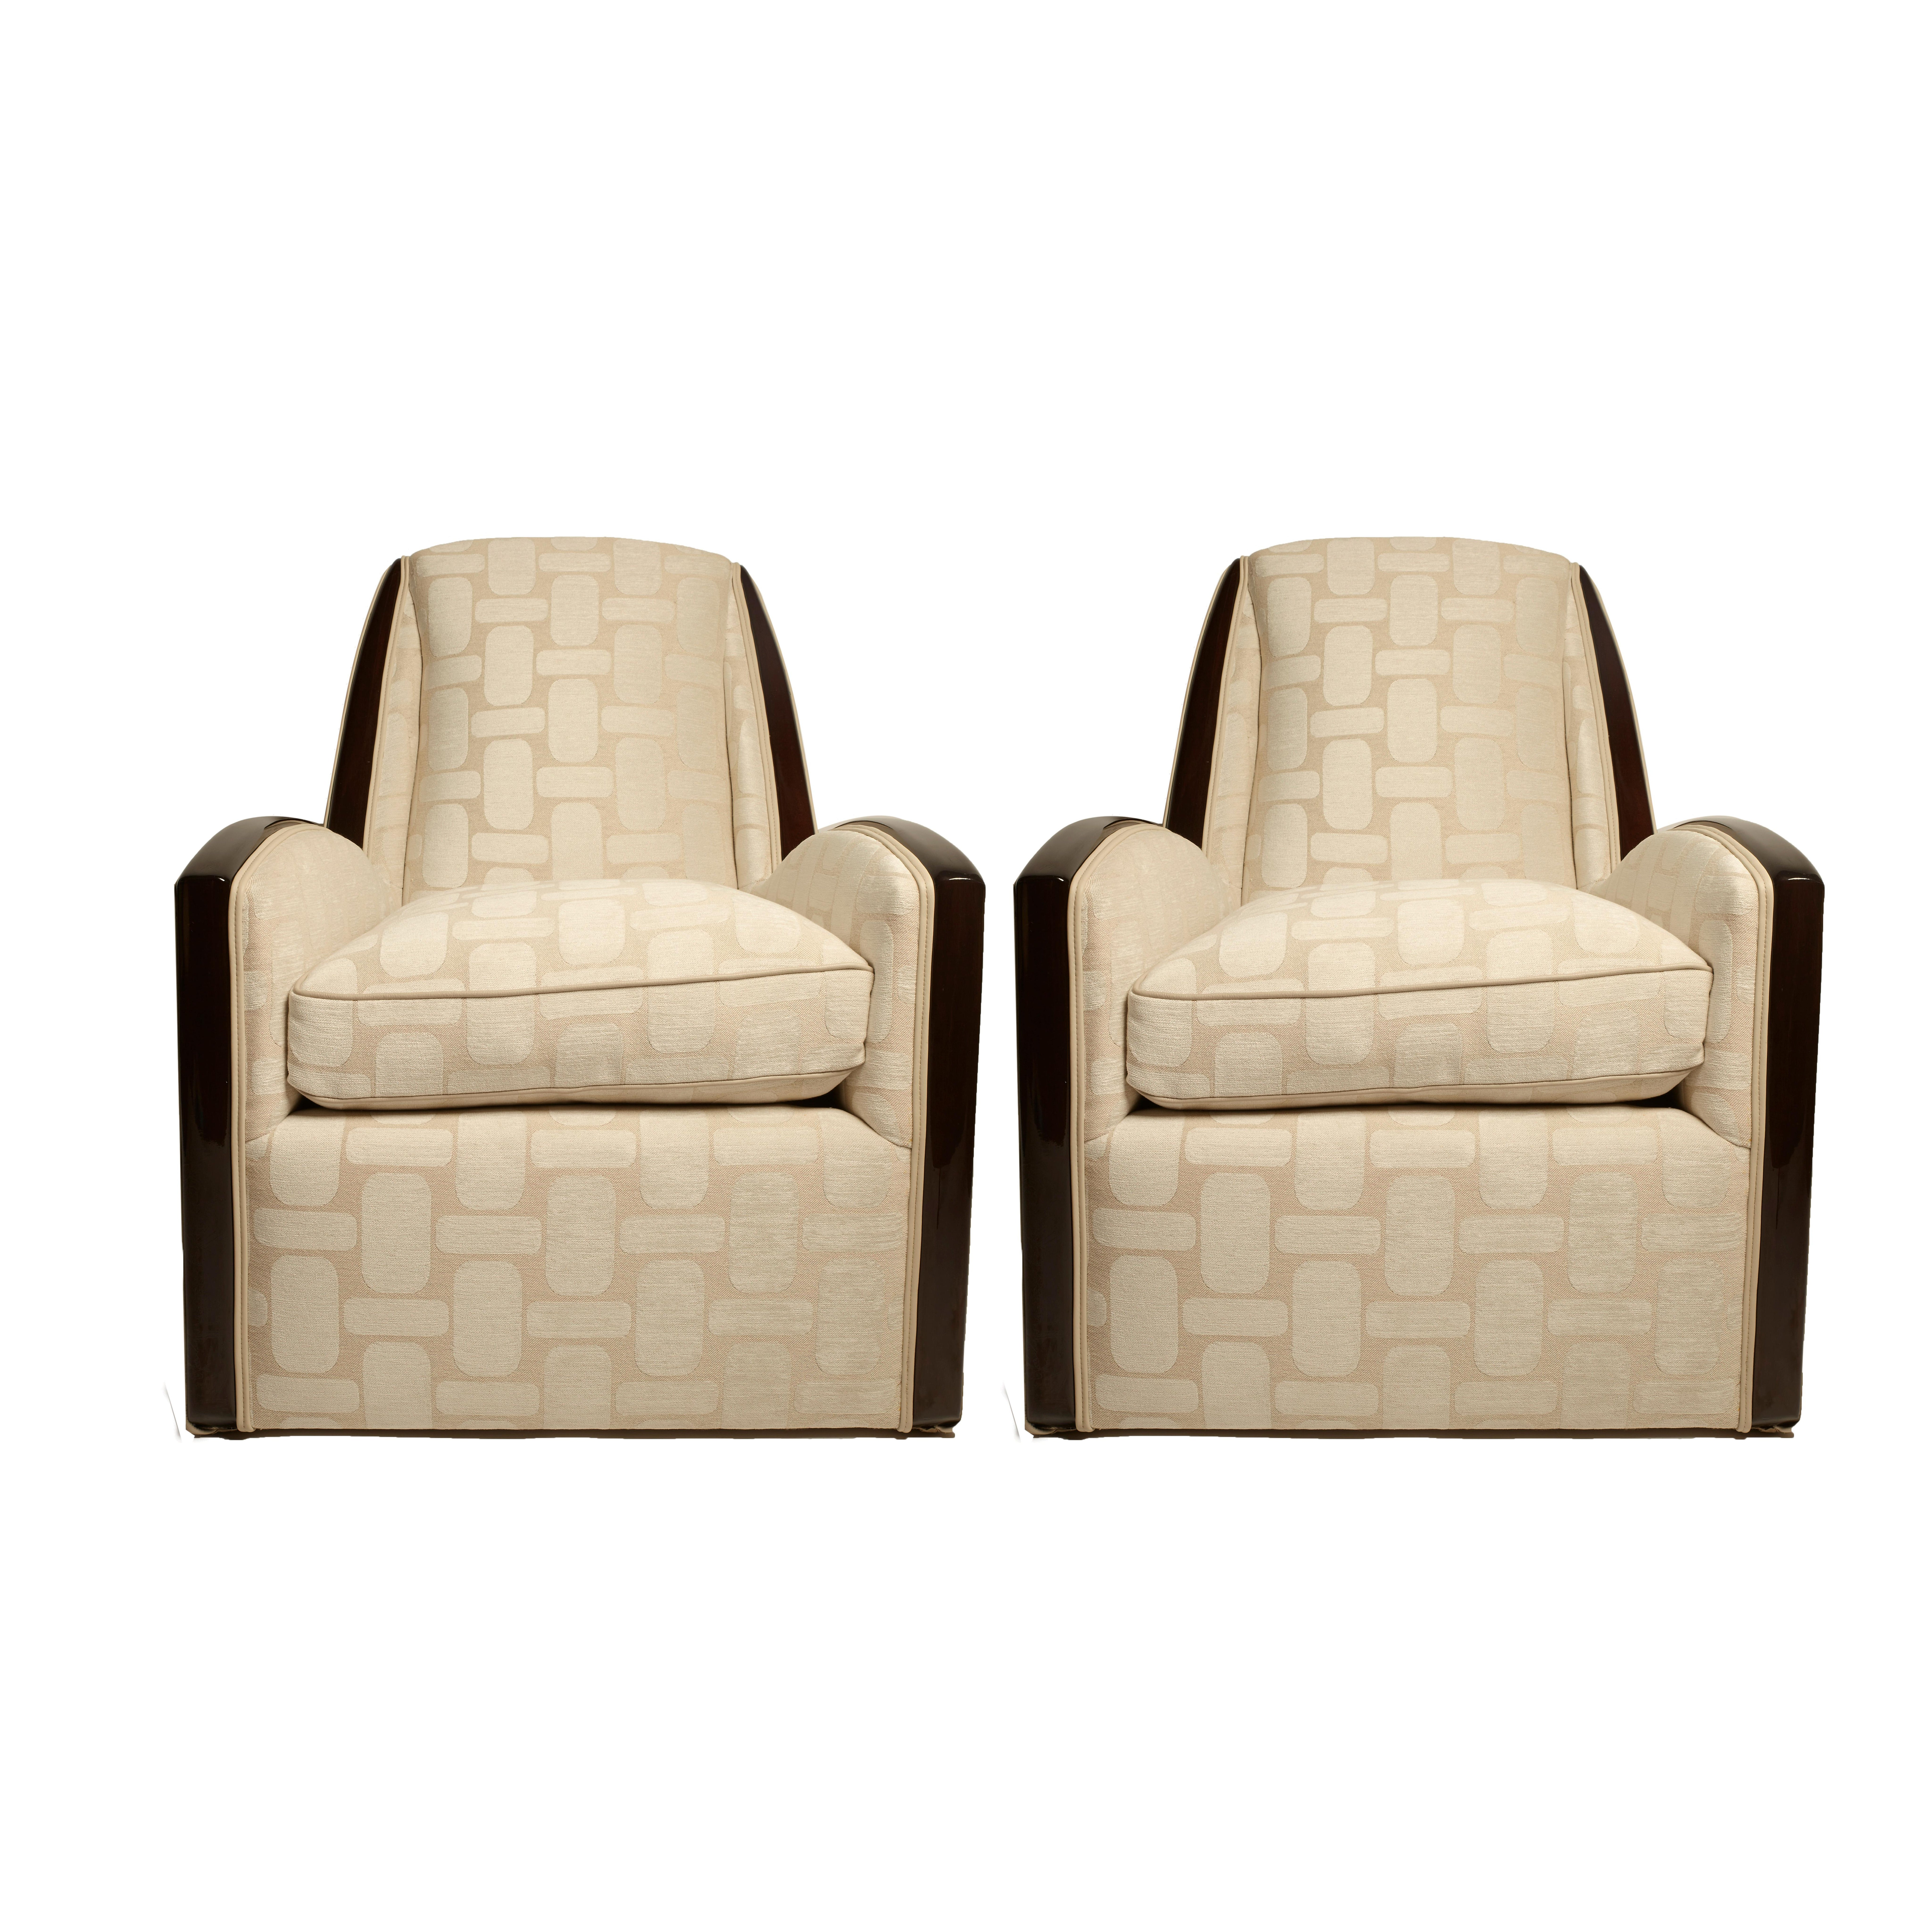 Pair of Art Deco style upholstered armchairs by Deangelis LTD for Diamond and Baratta, mid-1990s, re-upholstered in custom fabric.